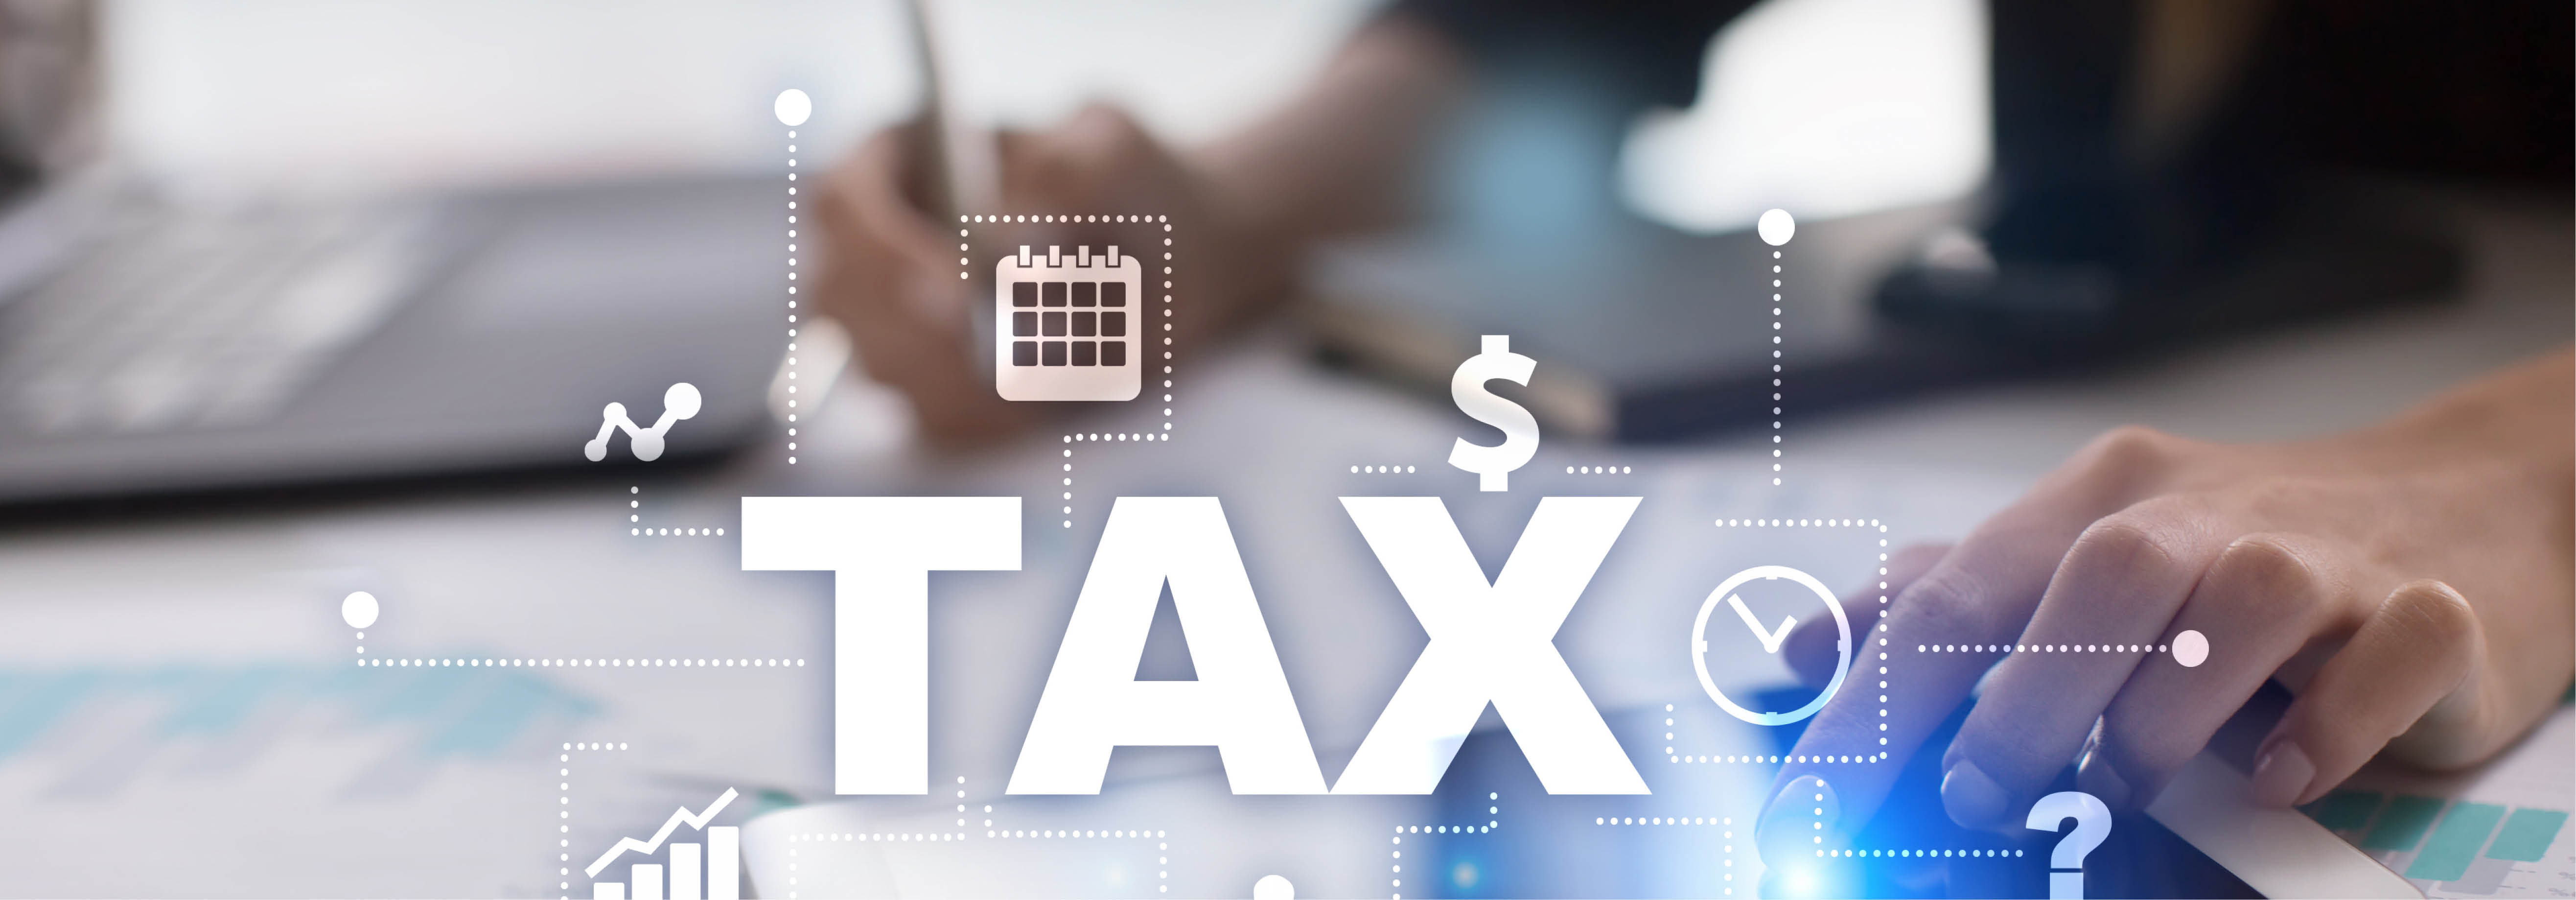 Tax & VAT Group - Tax Issues around Business Losses